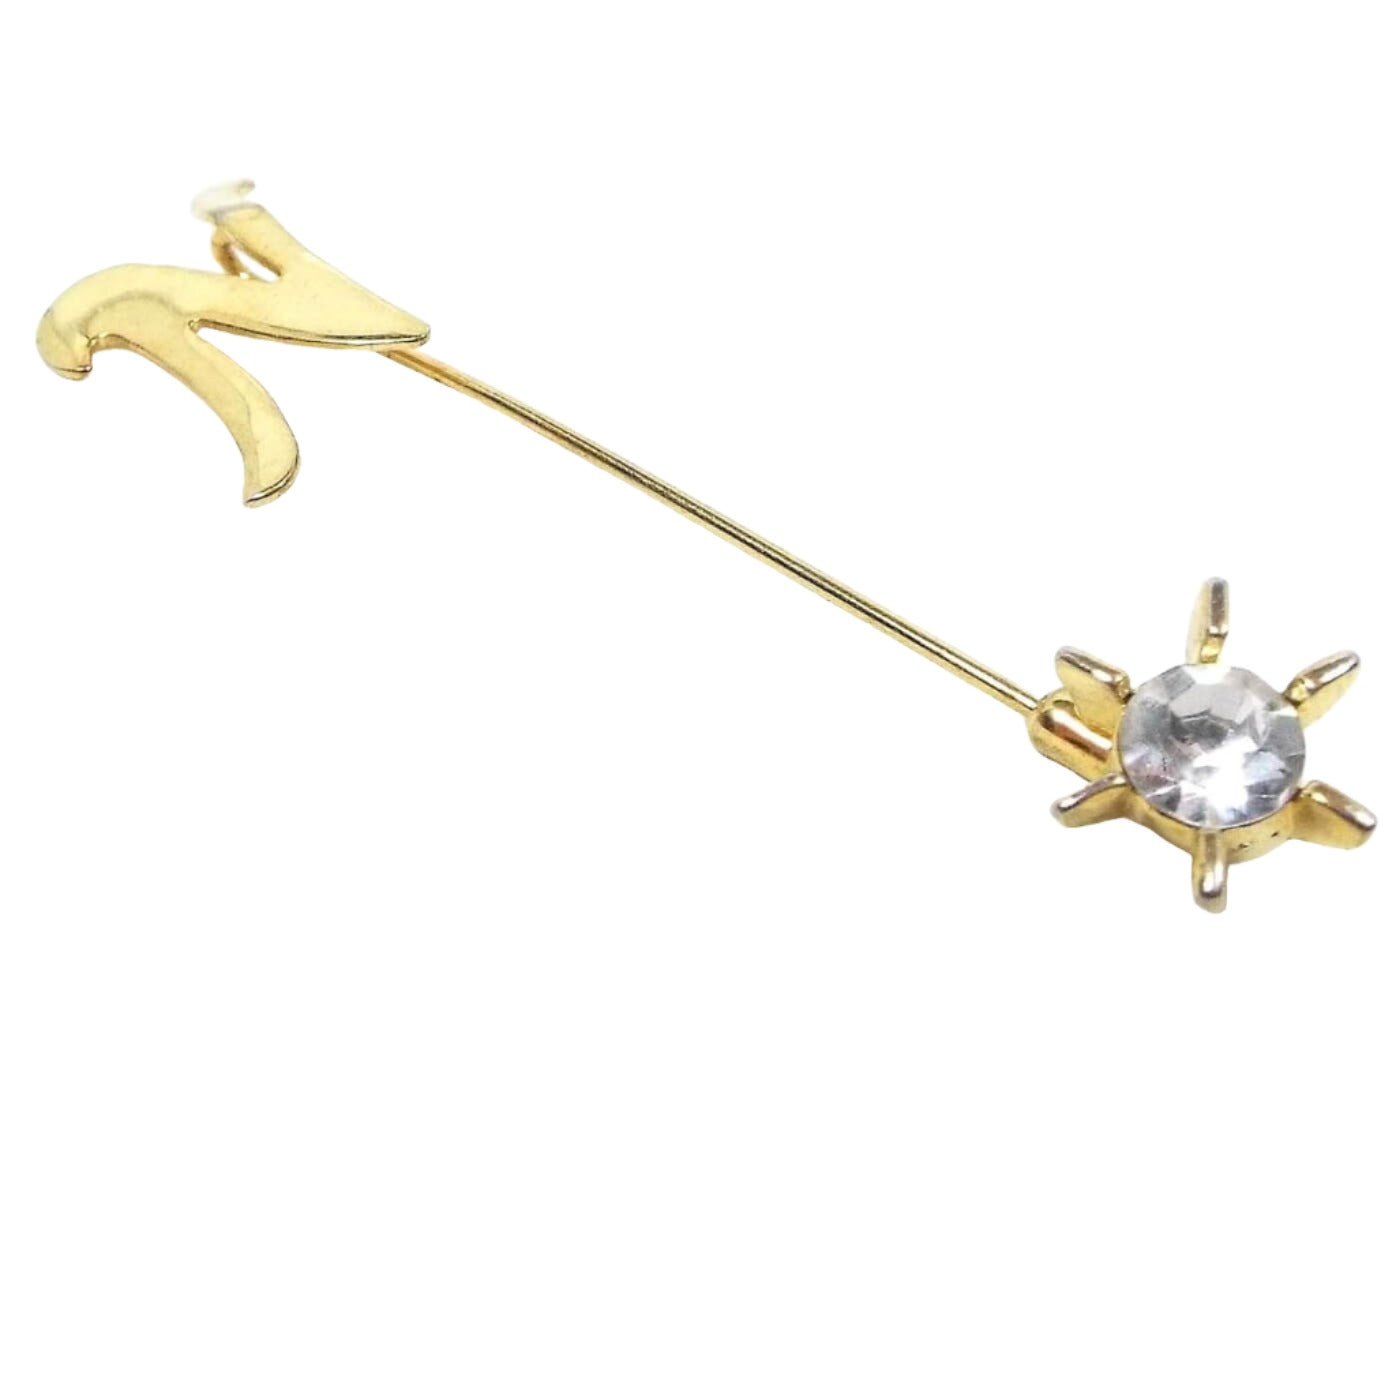 Front view of the Mid Century vintage rhinestone initial stick pin. The metal is gold tone in color. There is a curvy flat letter N at the top and a rhinestone starburst clutch at the bottom.